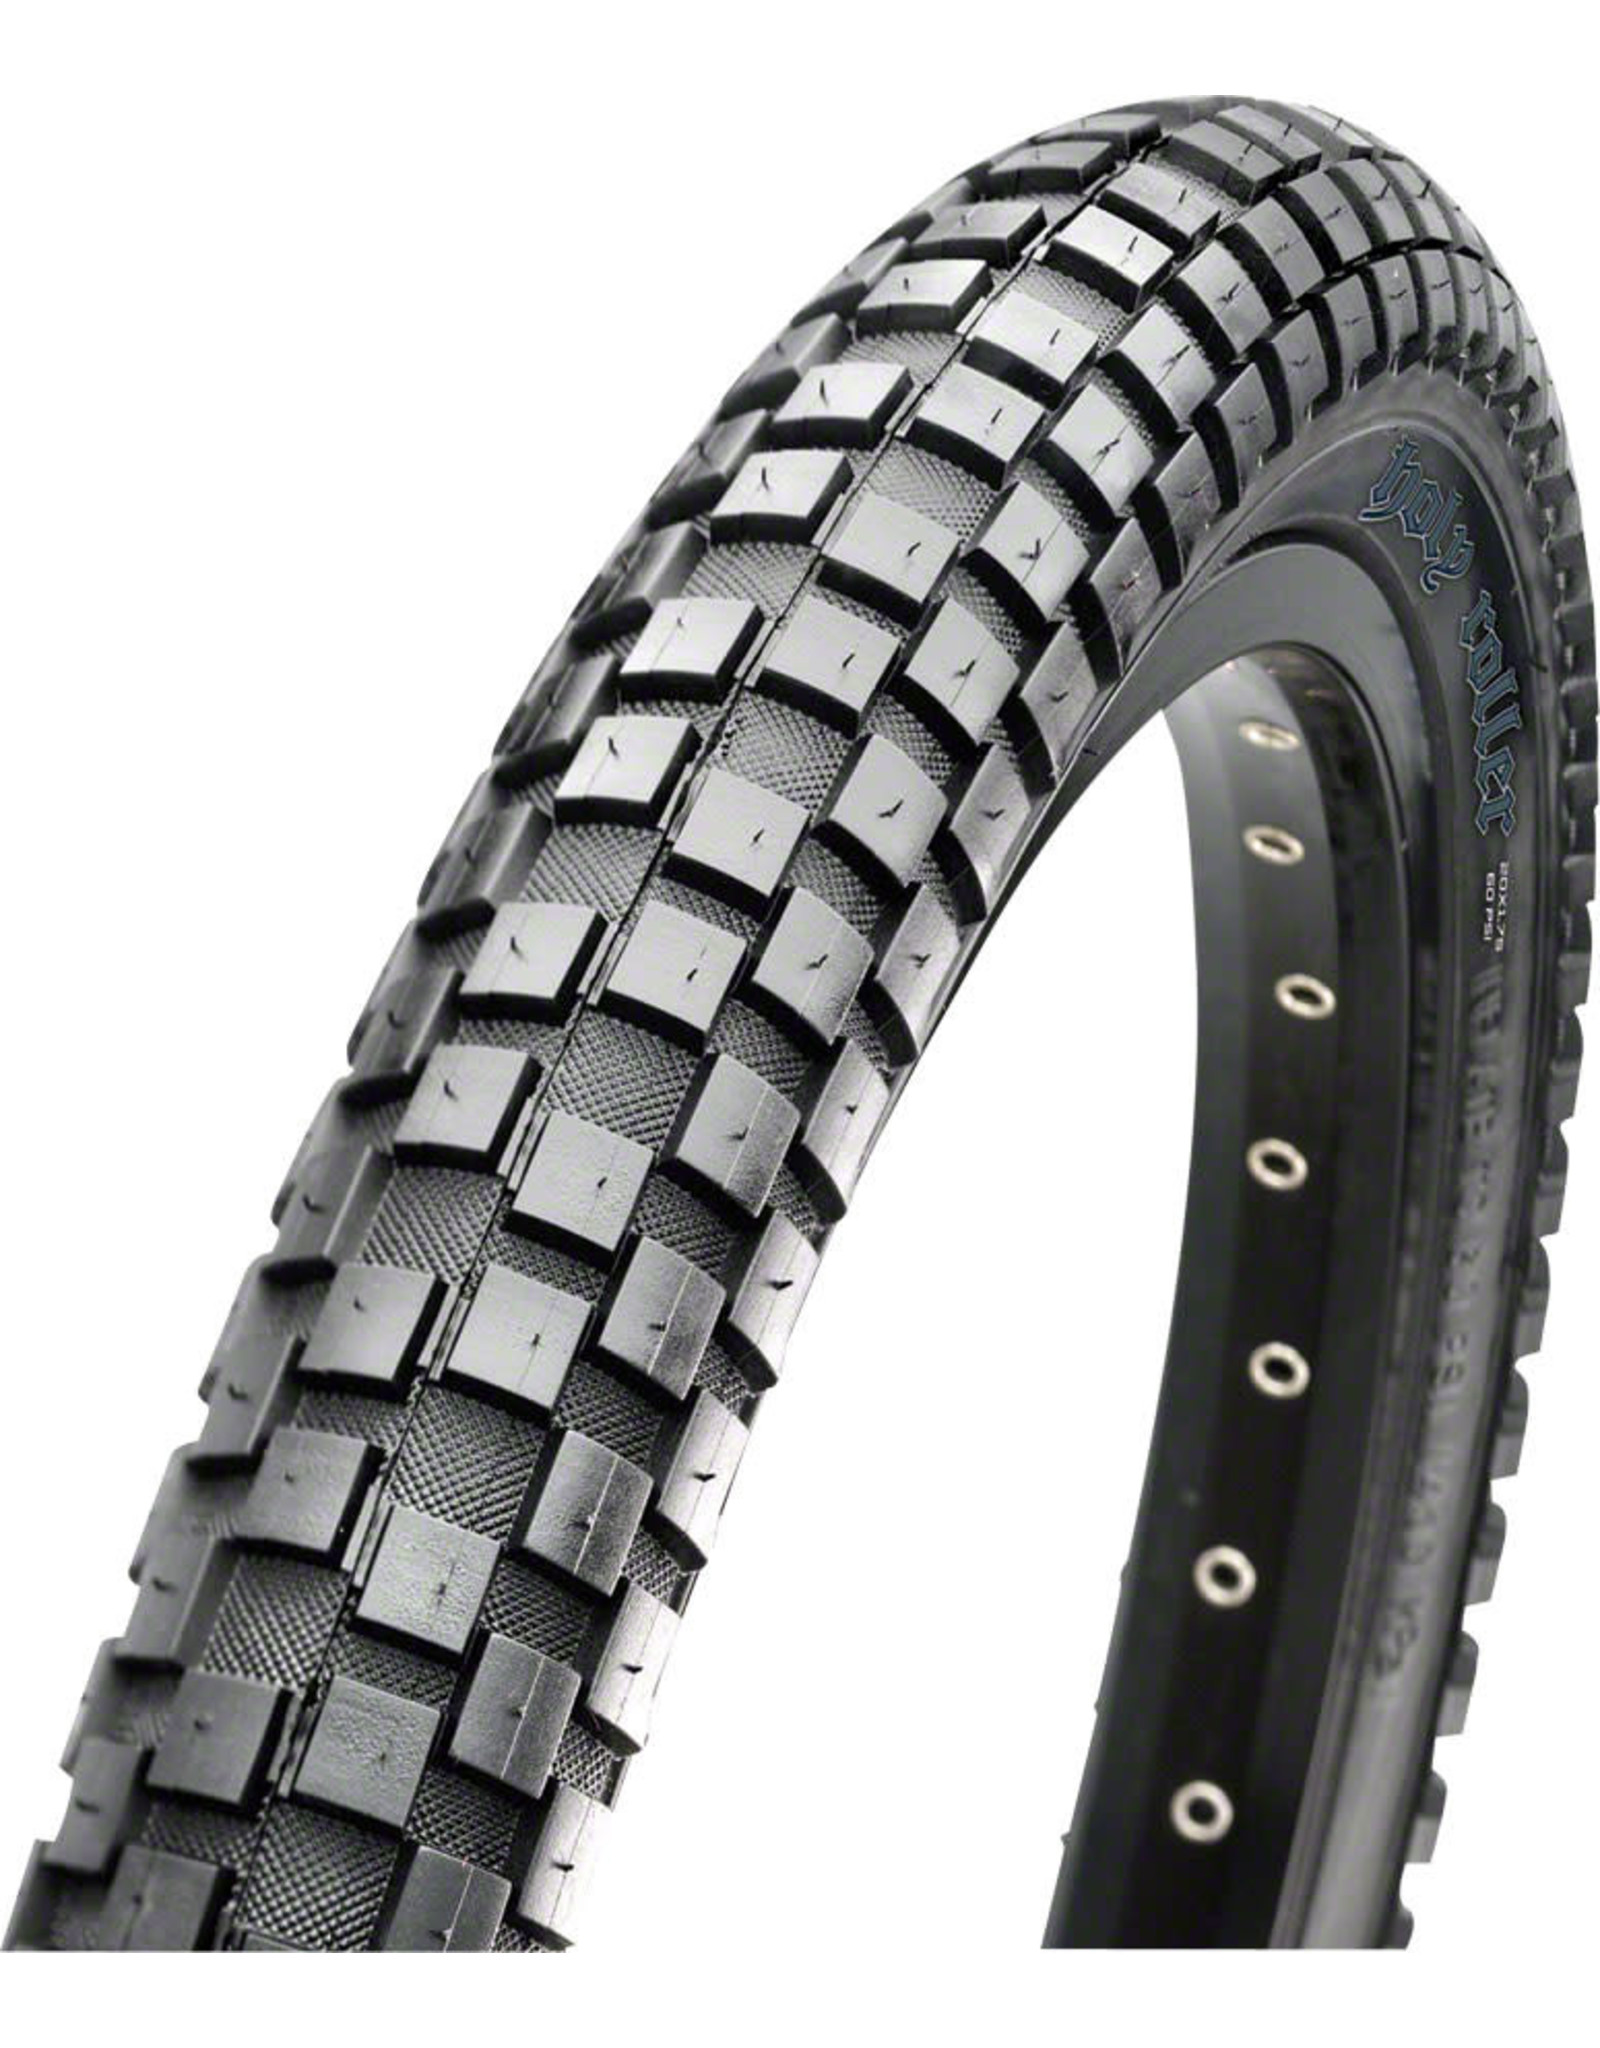 Maxxis Maxxis - Holy Roller Tire - 20 x 1.95, Clincher, Wire, Black, Single